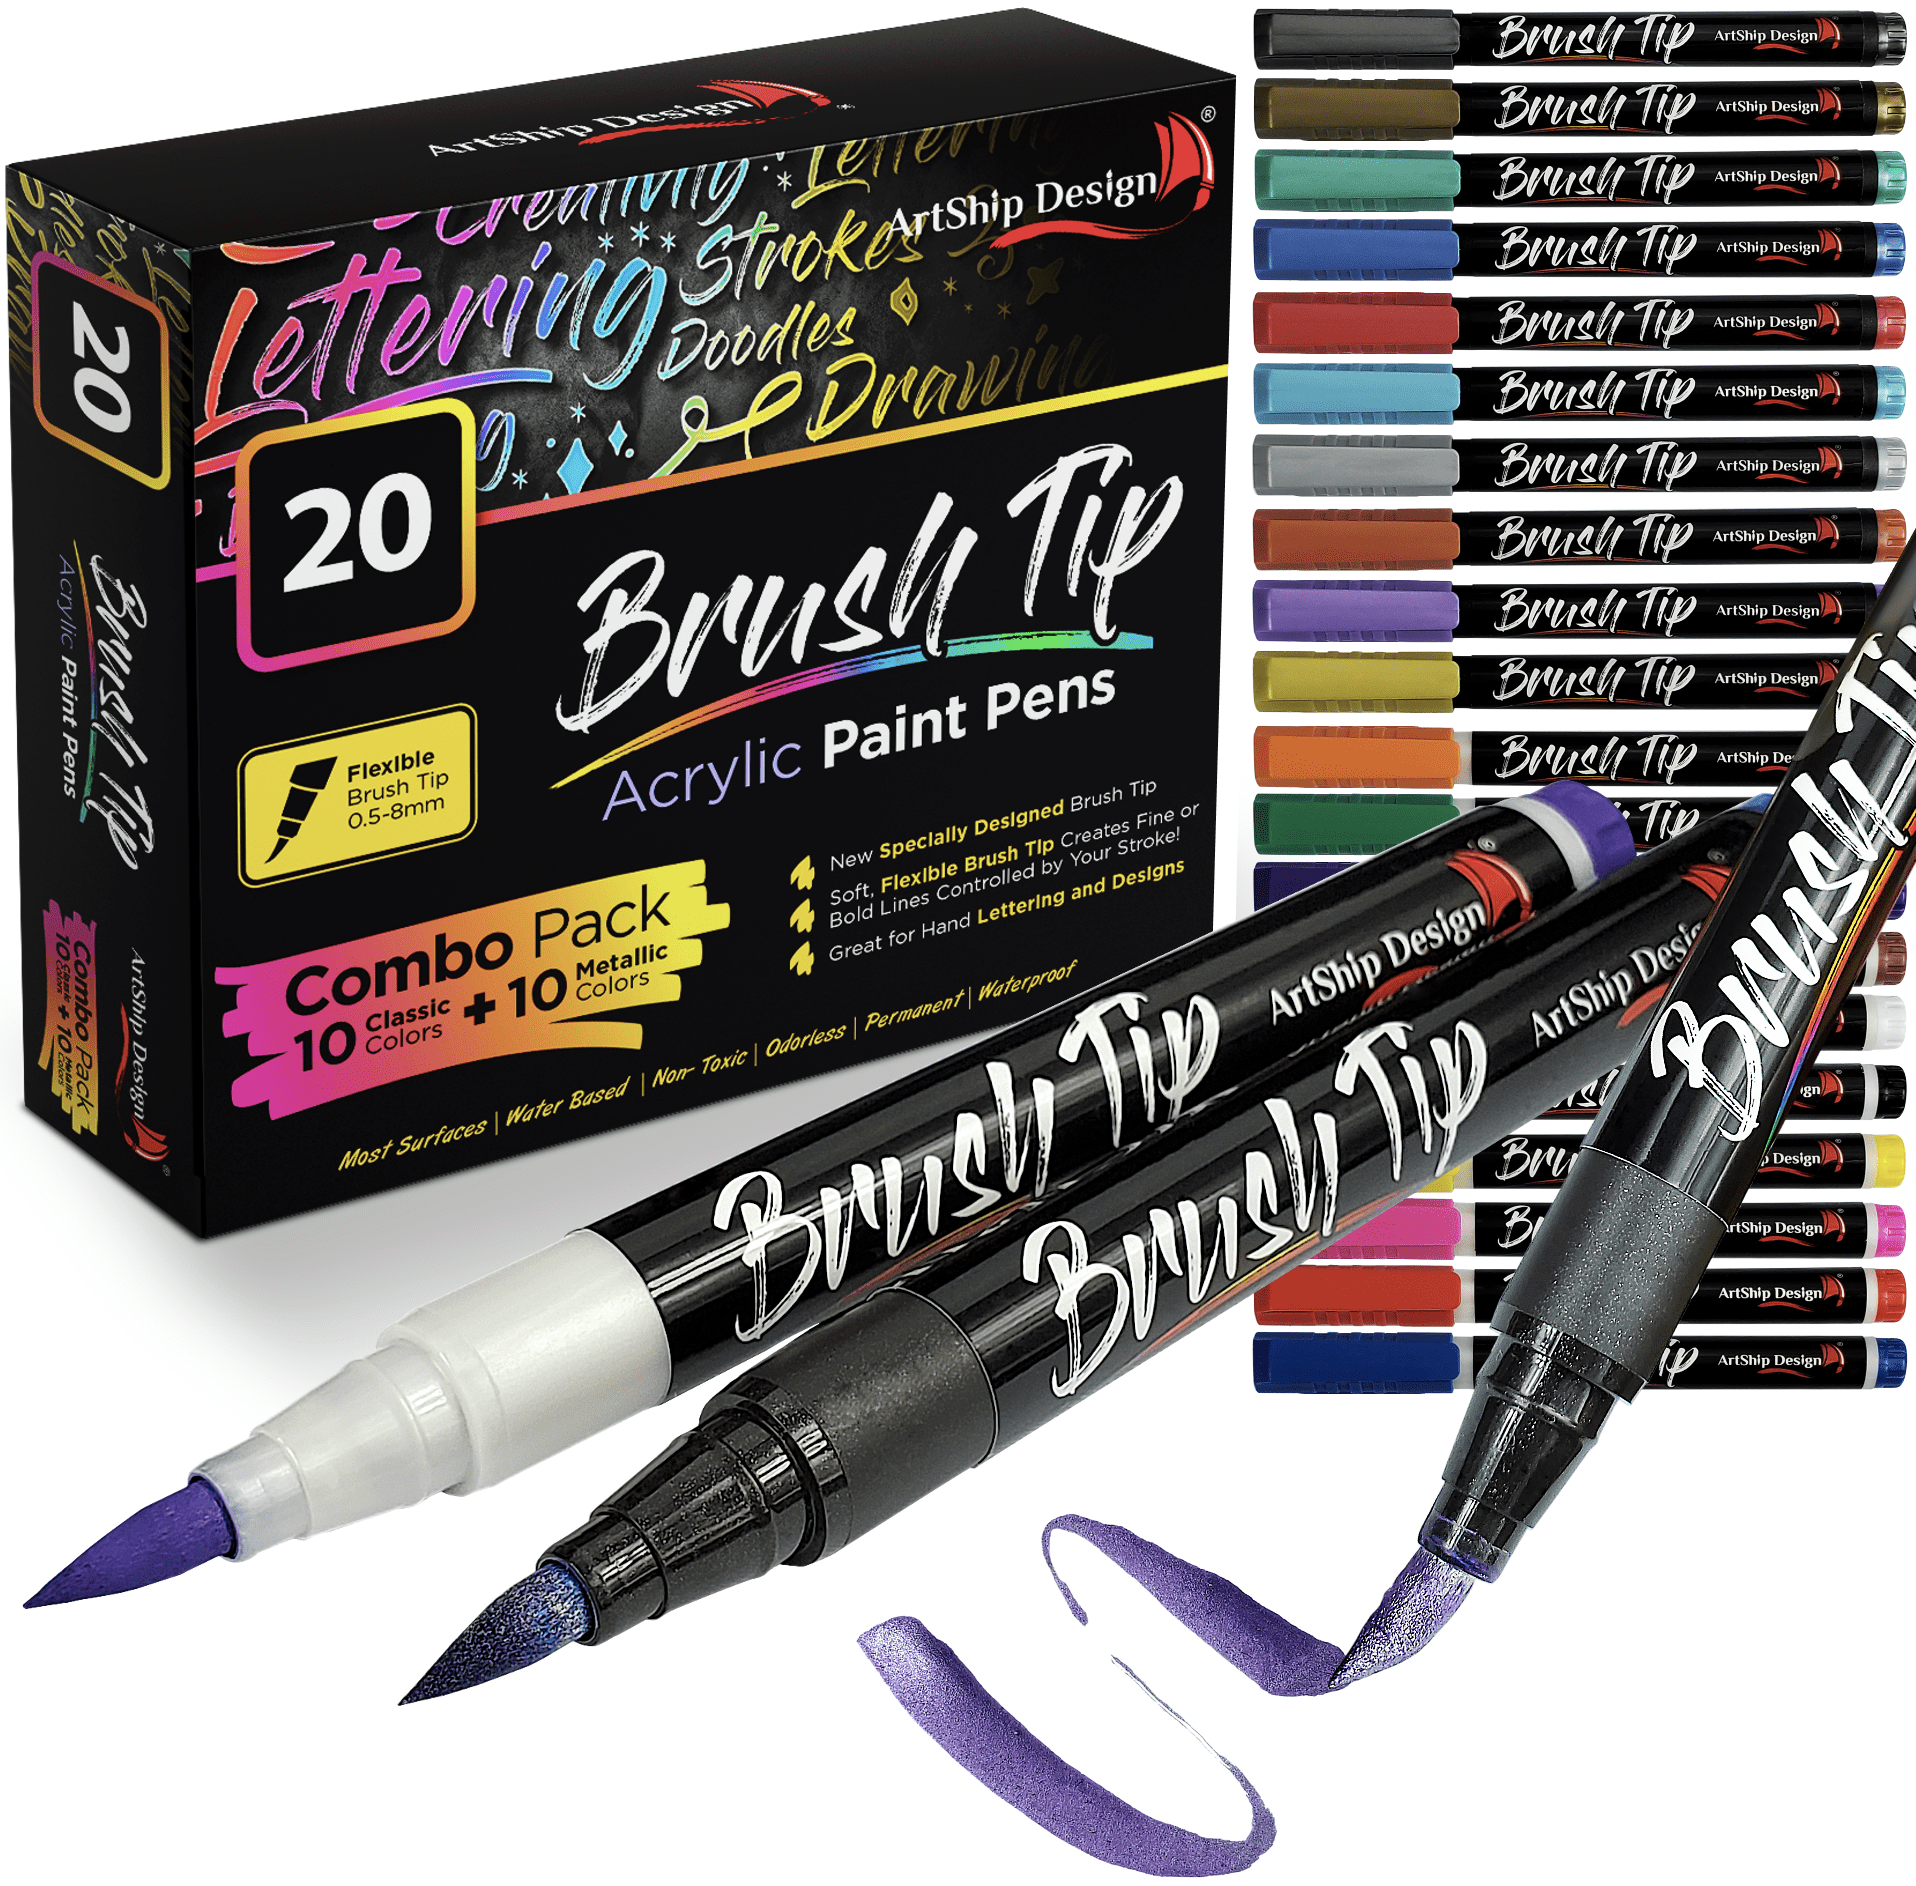 20 Brush Tip Acrylic Paint Pens, Classic and Metallic Color Double Pack, Flexible Tip Brush Paint Markers for Lettering and Creative Painting, Rocks